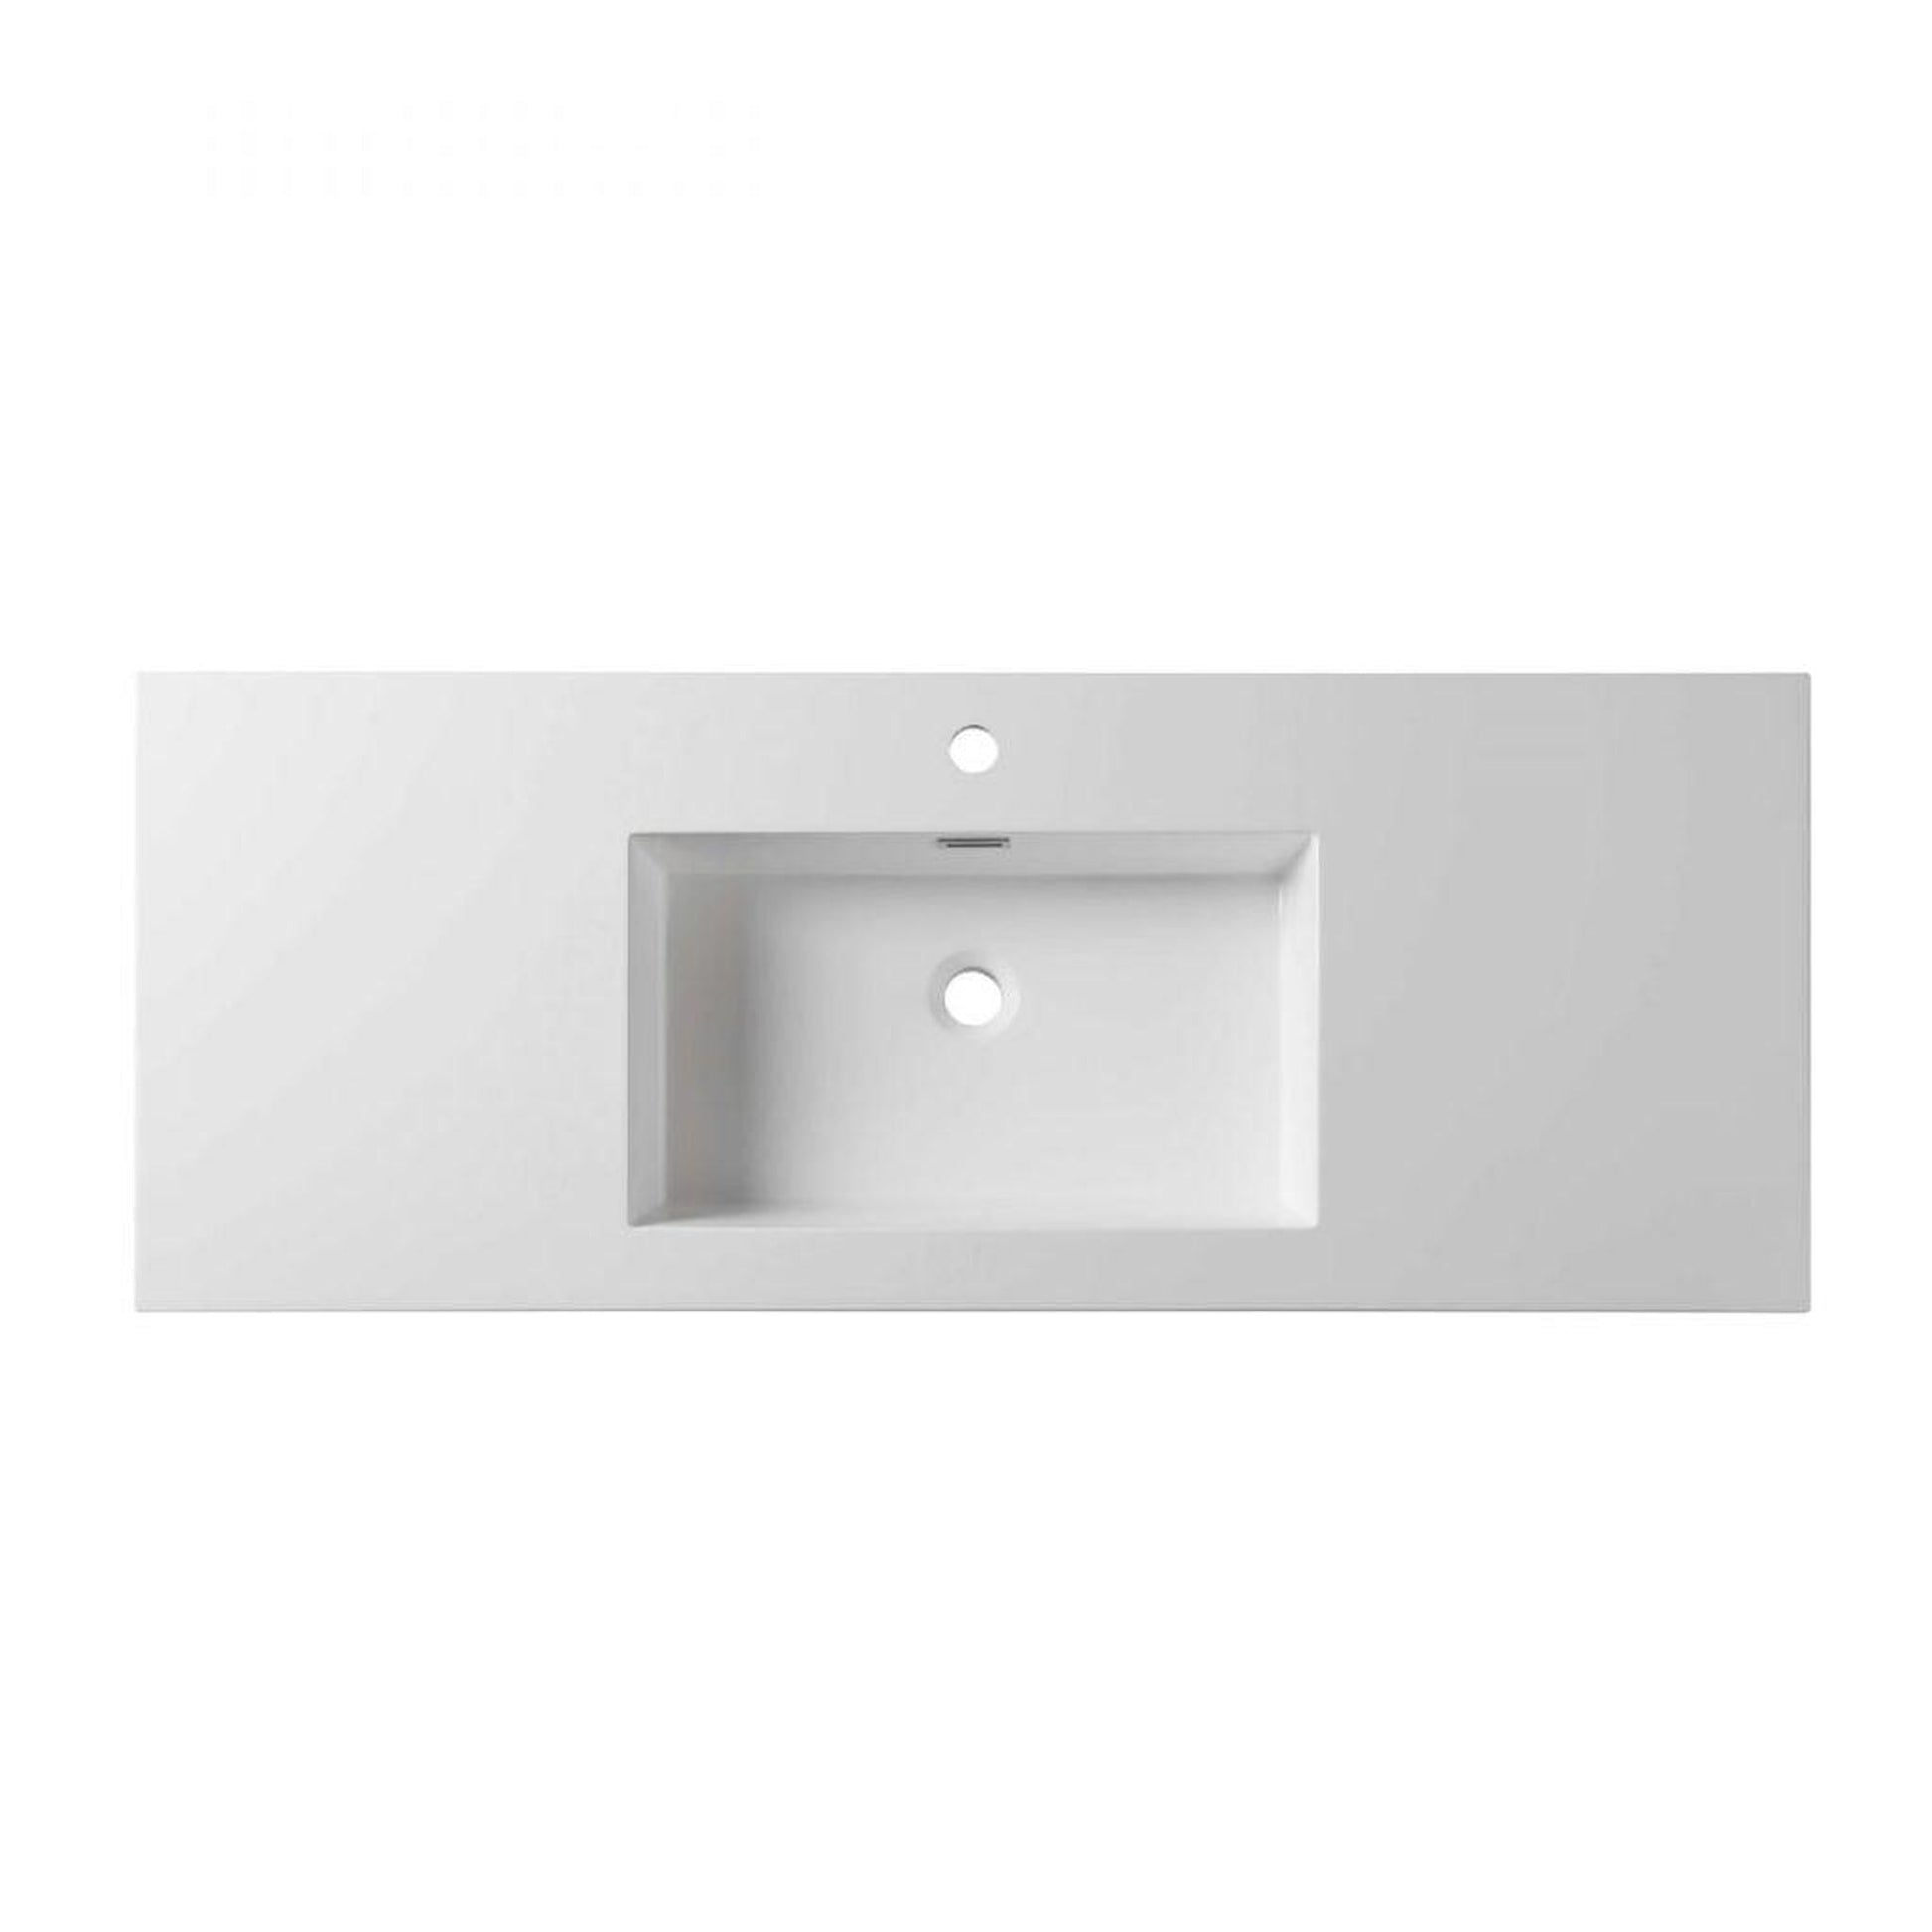 Blossom 48" x 18" White Rectangular Acrylic Vanity Top With Integrated Single Sink And Overflow